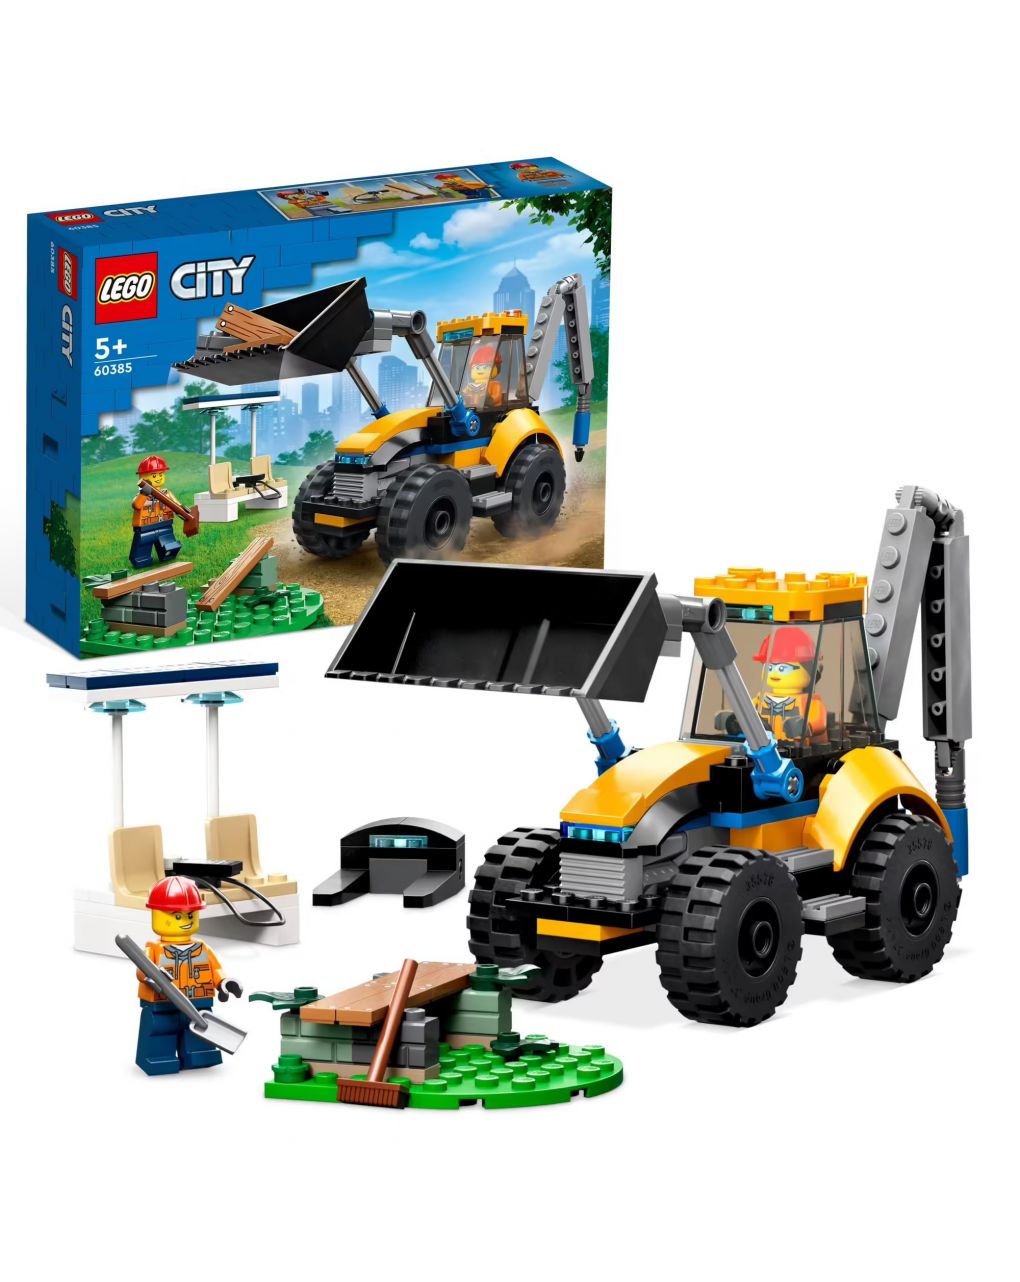 Lego city great vehicles construction digger 60385 - Lego, Lego City, Lego City Great Vehicles